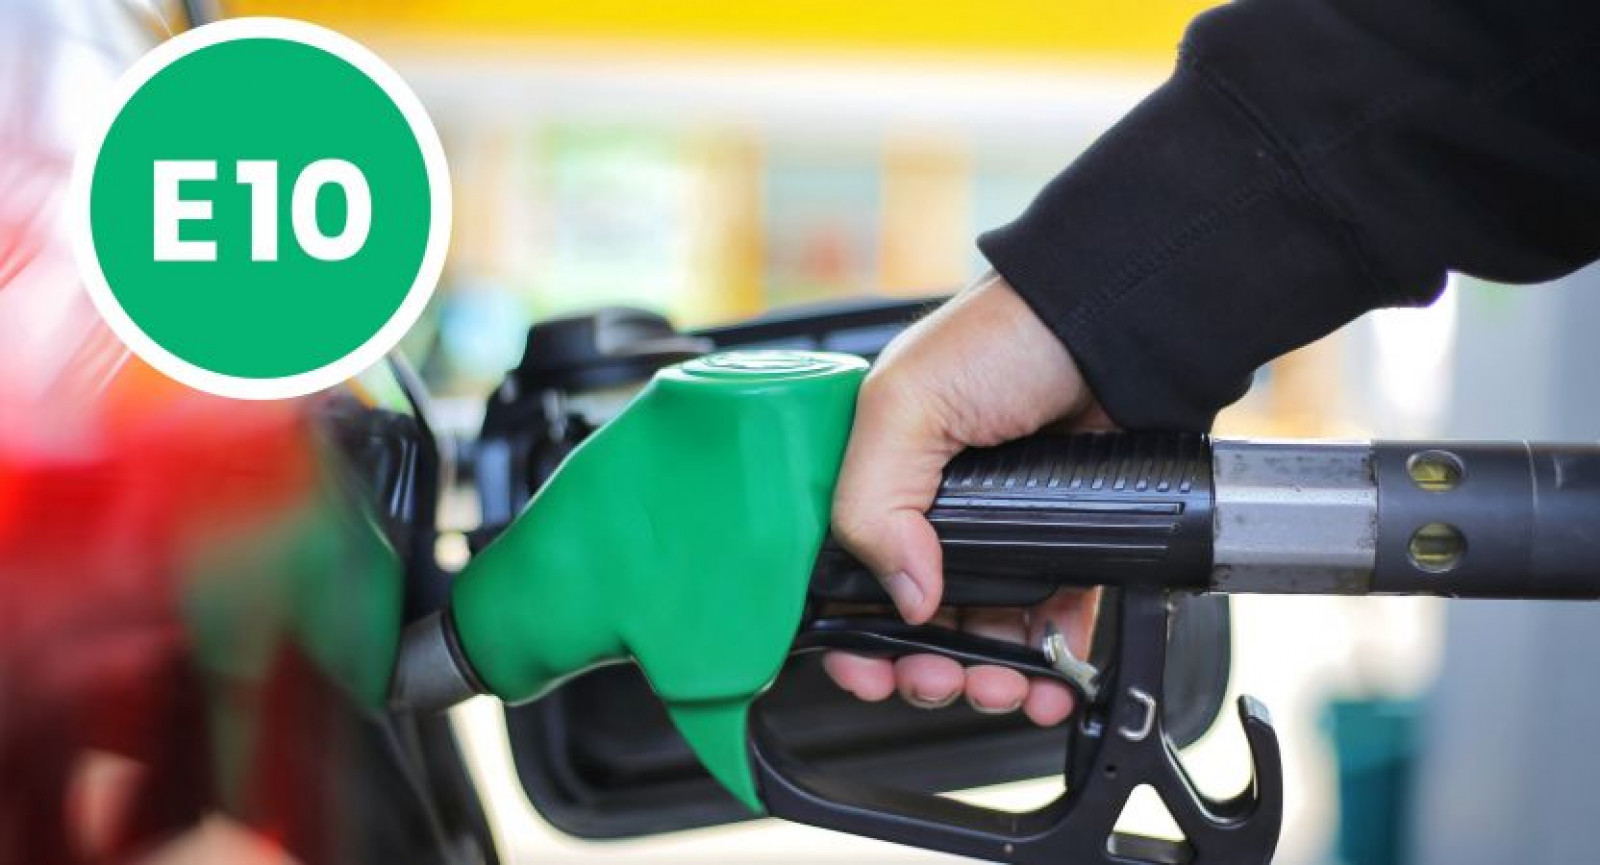 UK petrol pumps are converting to E10 fuel